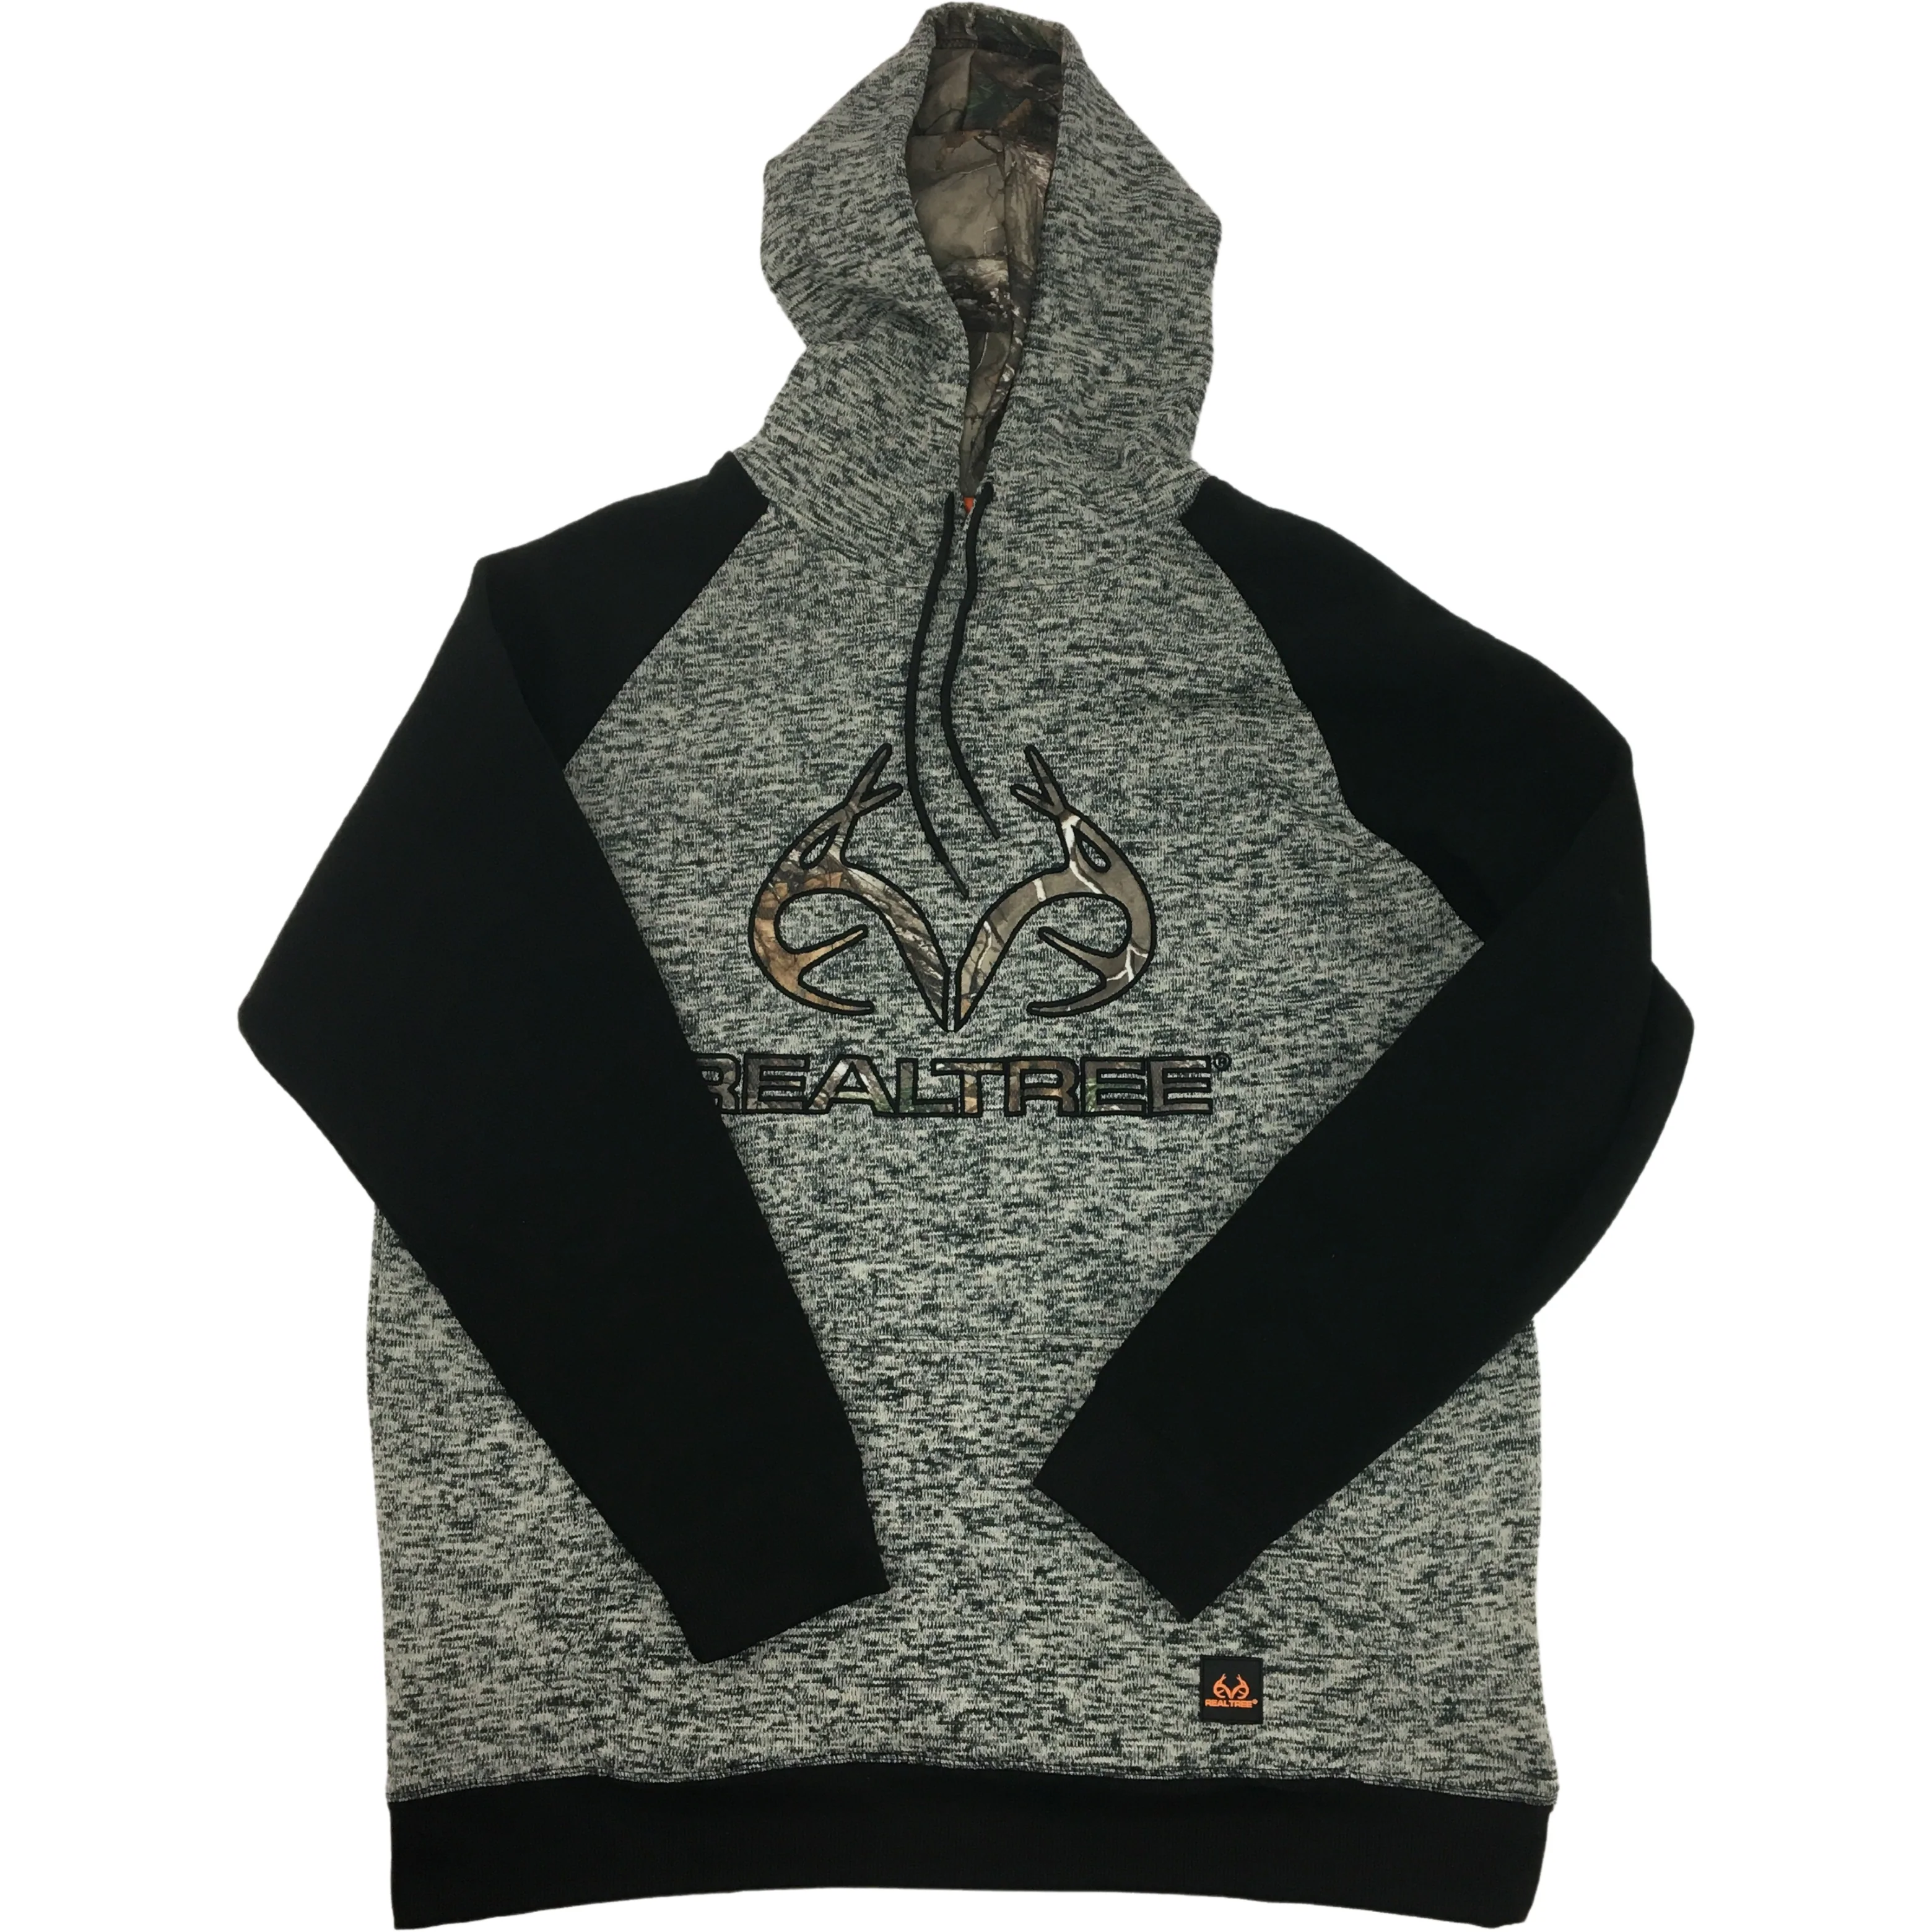 Realtree Men's Hooded Sweater / Grey and Black / Size XLarge